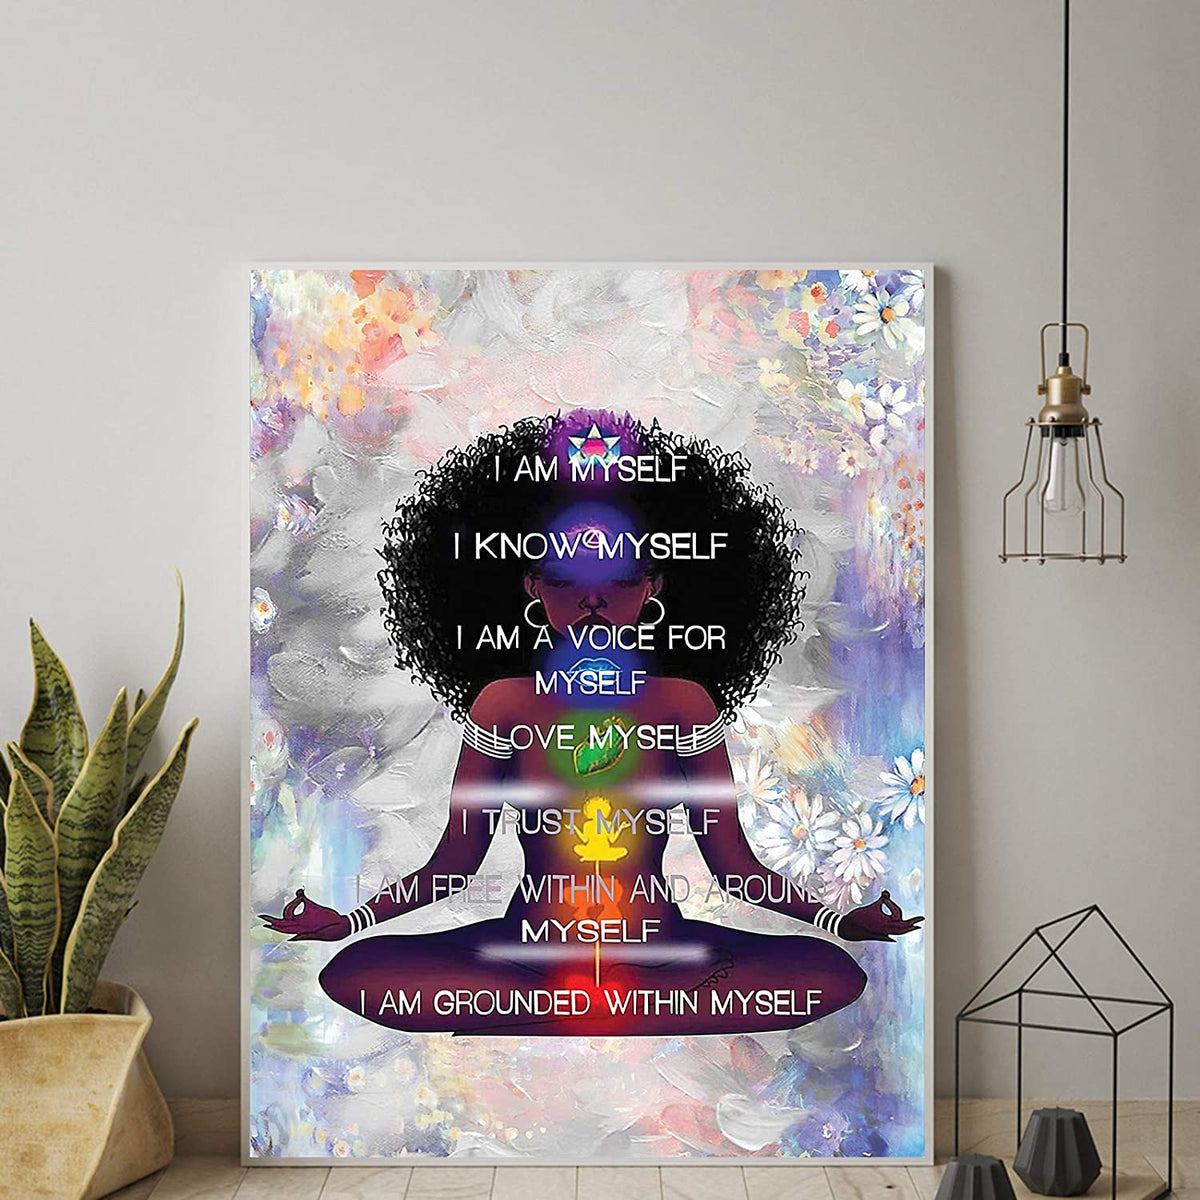 Black Girl Canvas, Black Queen Girl Wall Art Meditation Vertical Poster African American Portrait Canvas Wall Art Abstract Contemporary Matte Prints Painting Home Decor